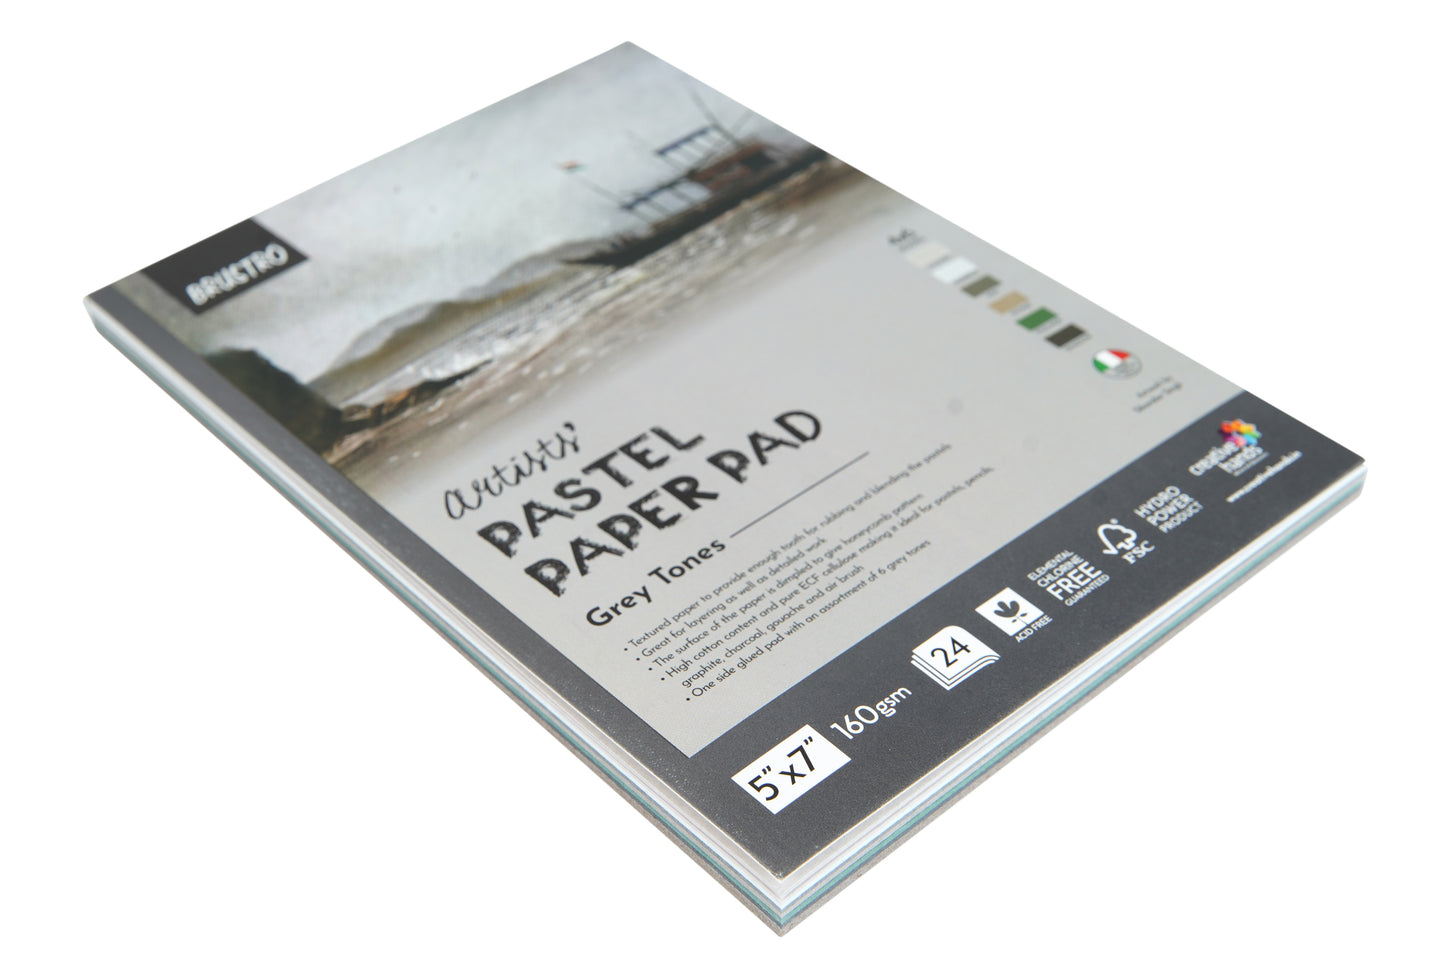 Brustro Artists' Pastel Paper Pad of 24 Sheets (160 GSM), Colour - Grey Tones, Size - 5 x 7"